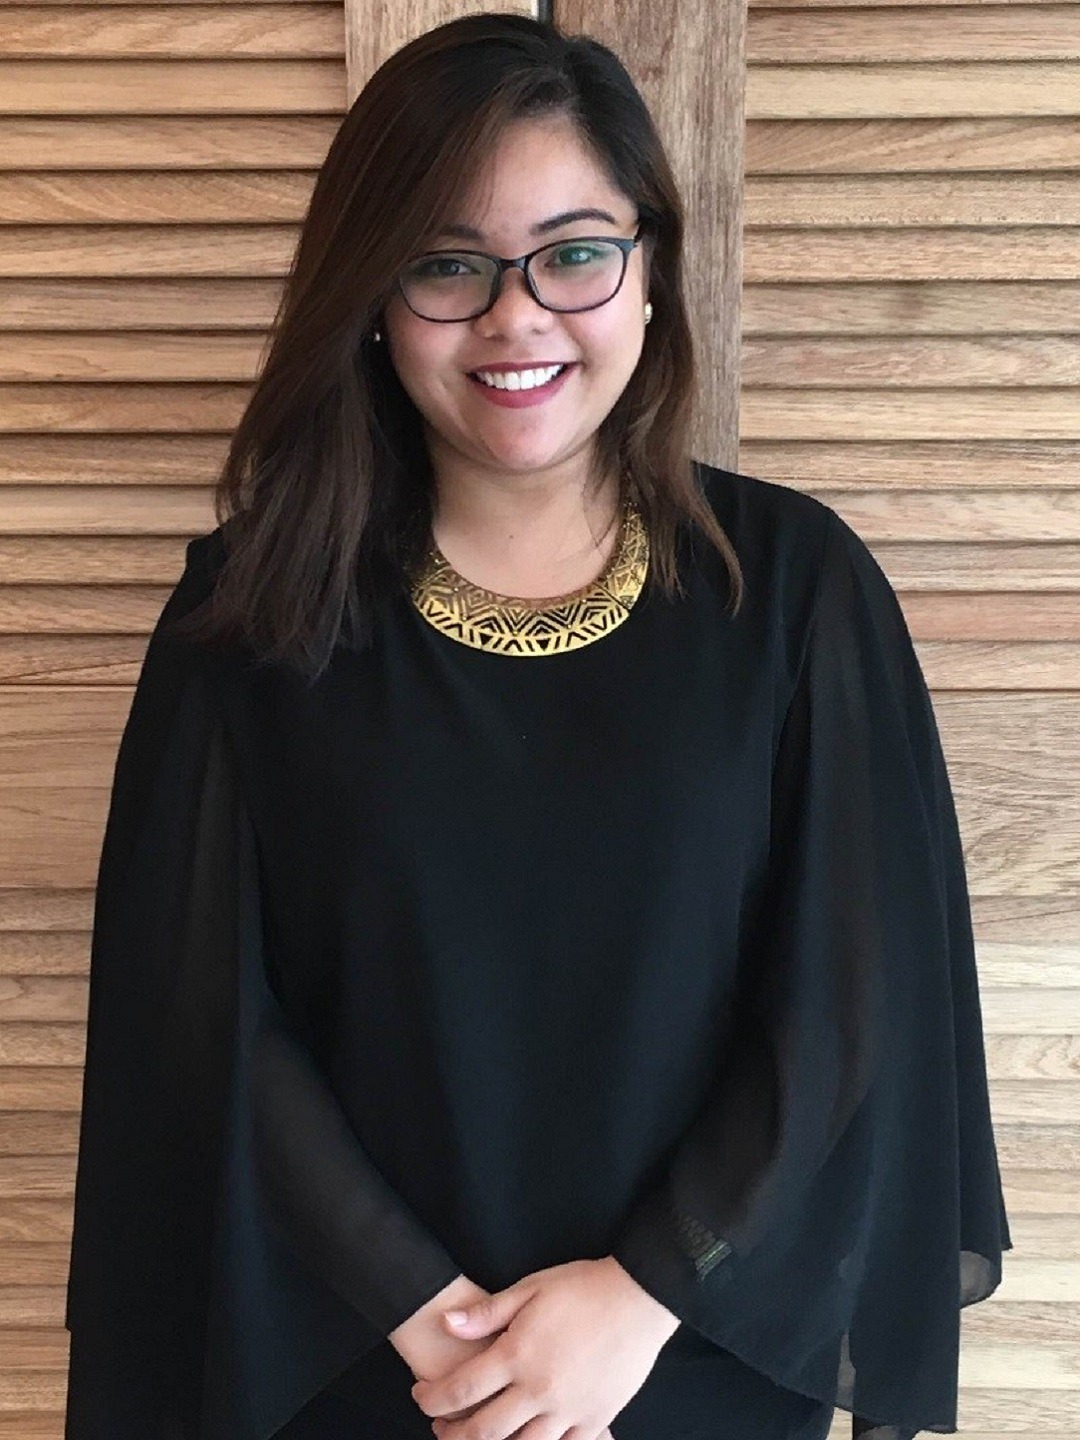 “I joined Curtin Malaysia and took the Foundation in Arts programme before entering the Bachelor of Arts (Mass Communication). From the very beginning, we were not only exposed to learning theories and concepts, but also given the opportunities to...